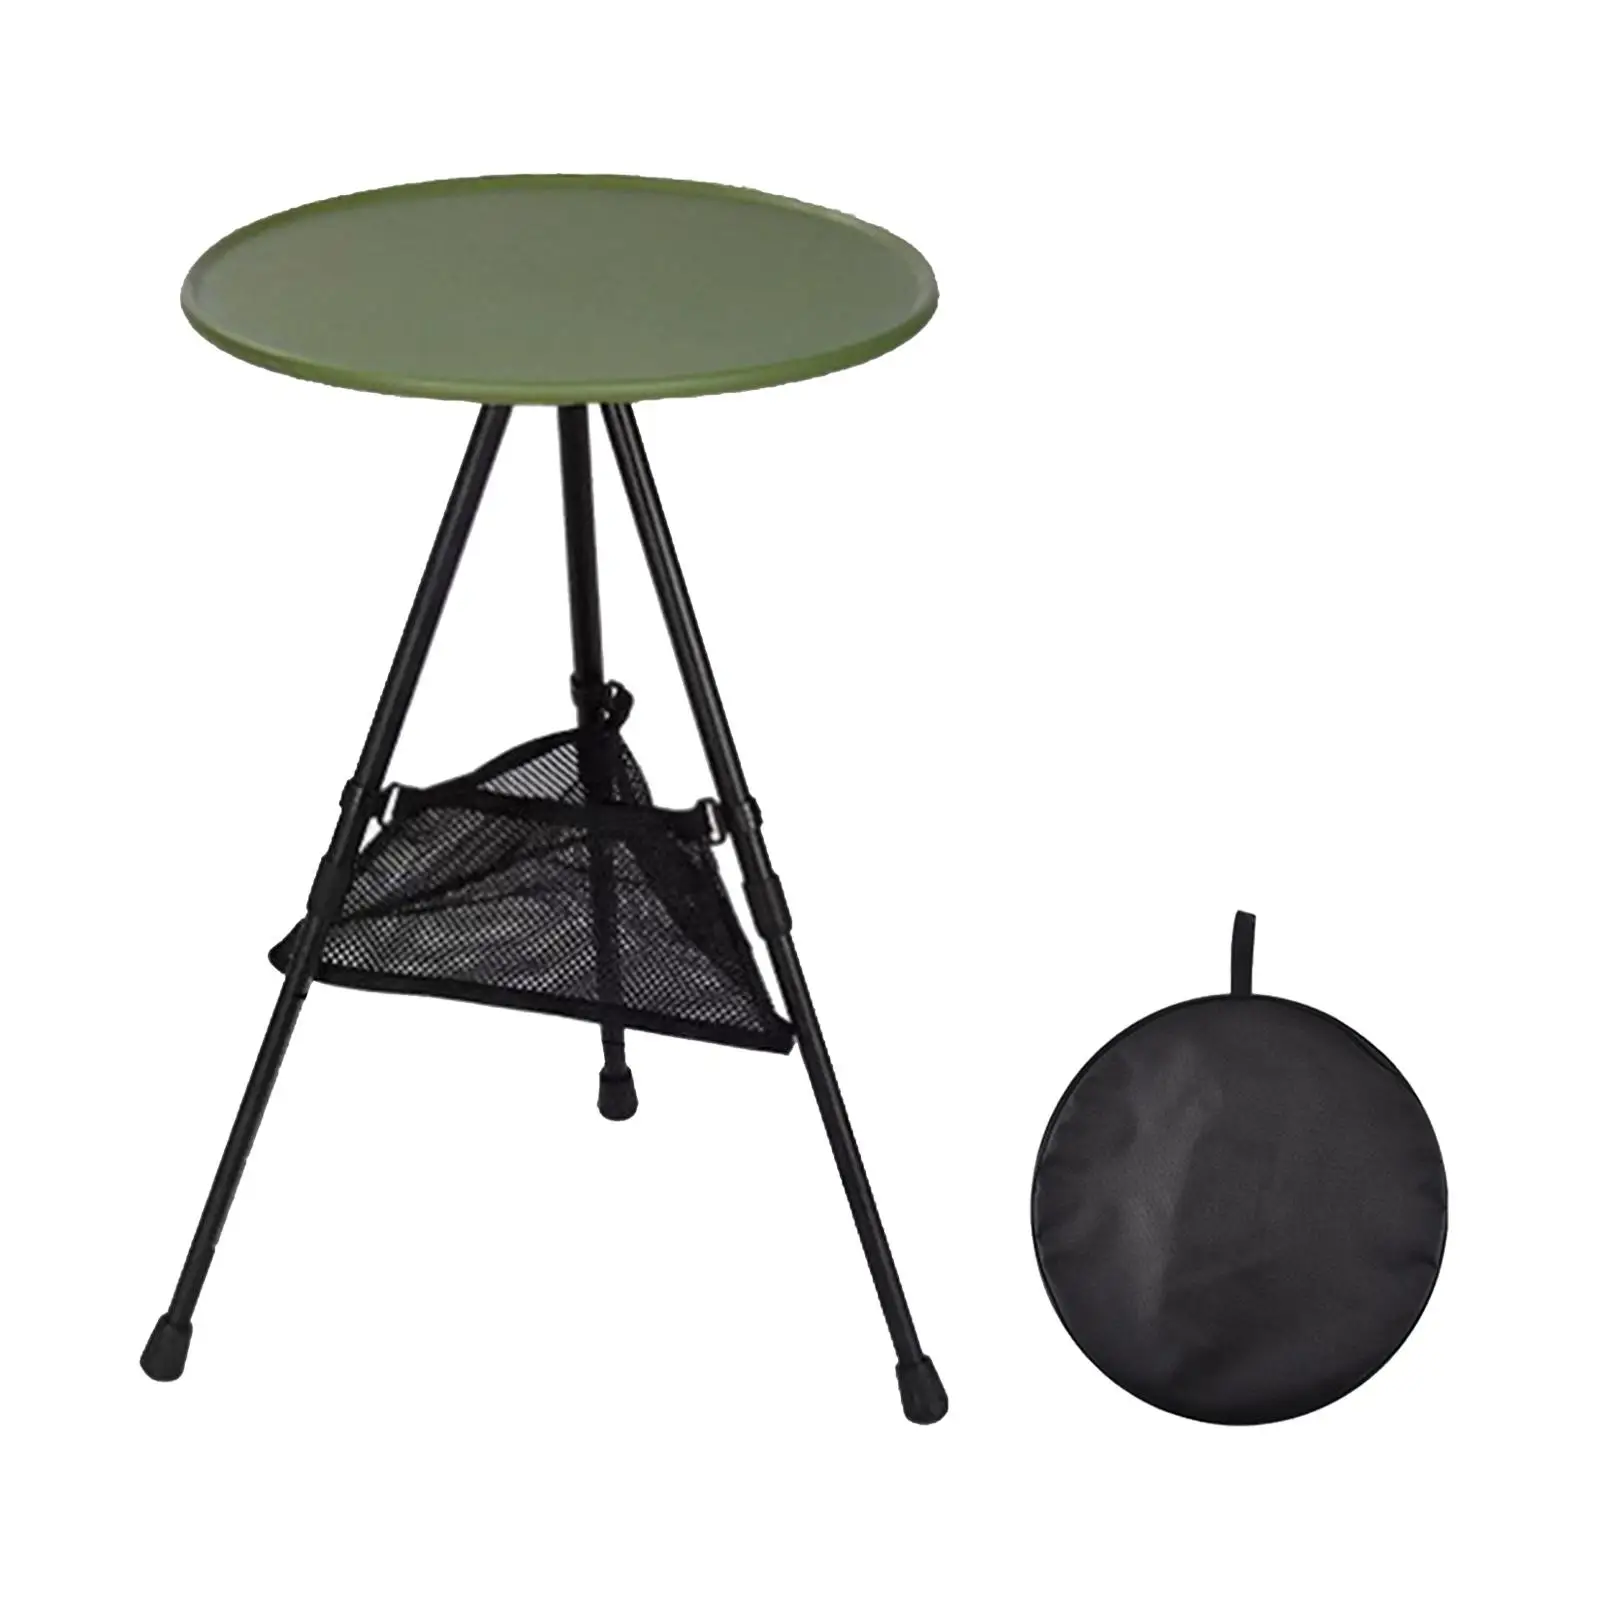 Outdoor Round Table Coffee Tea Table Portable Folding Camping Table Dining Table Mini Foldable Picnic Table for Beach Party Deck